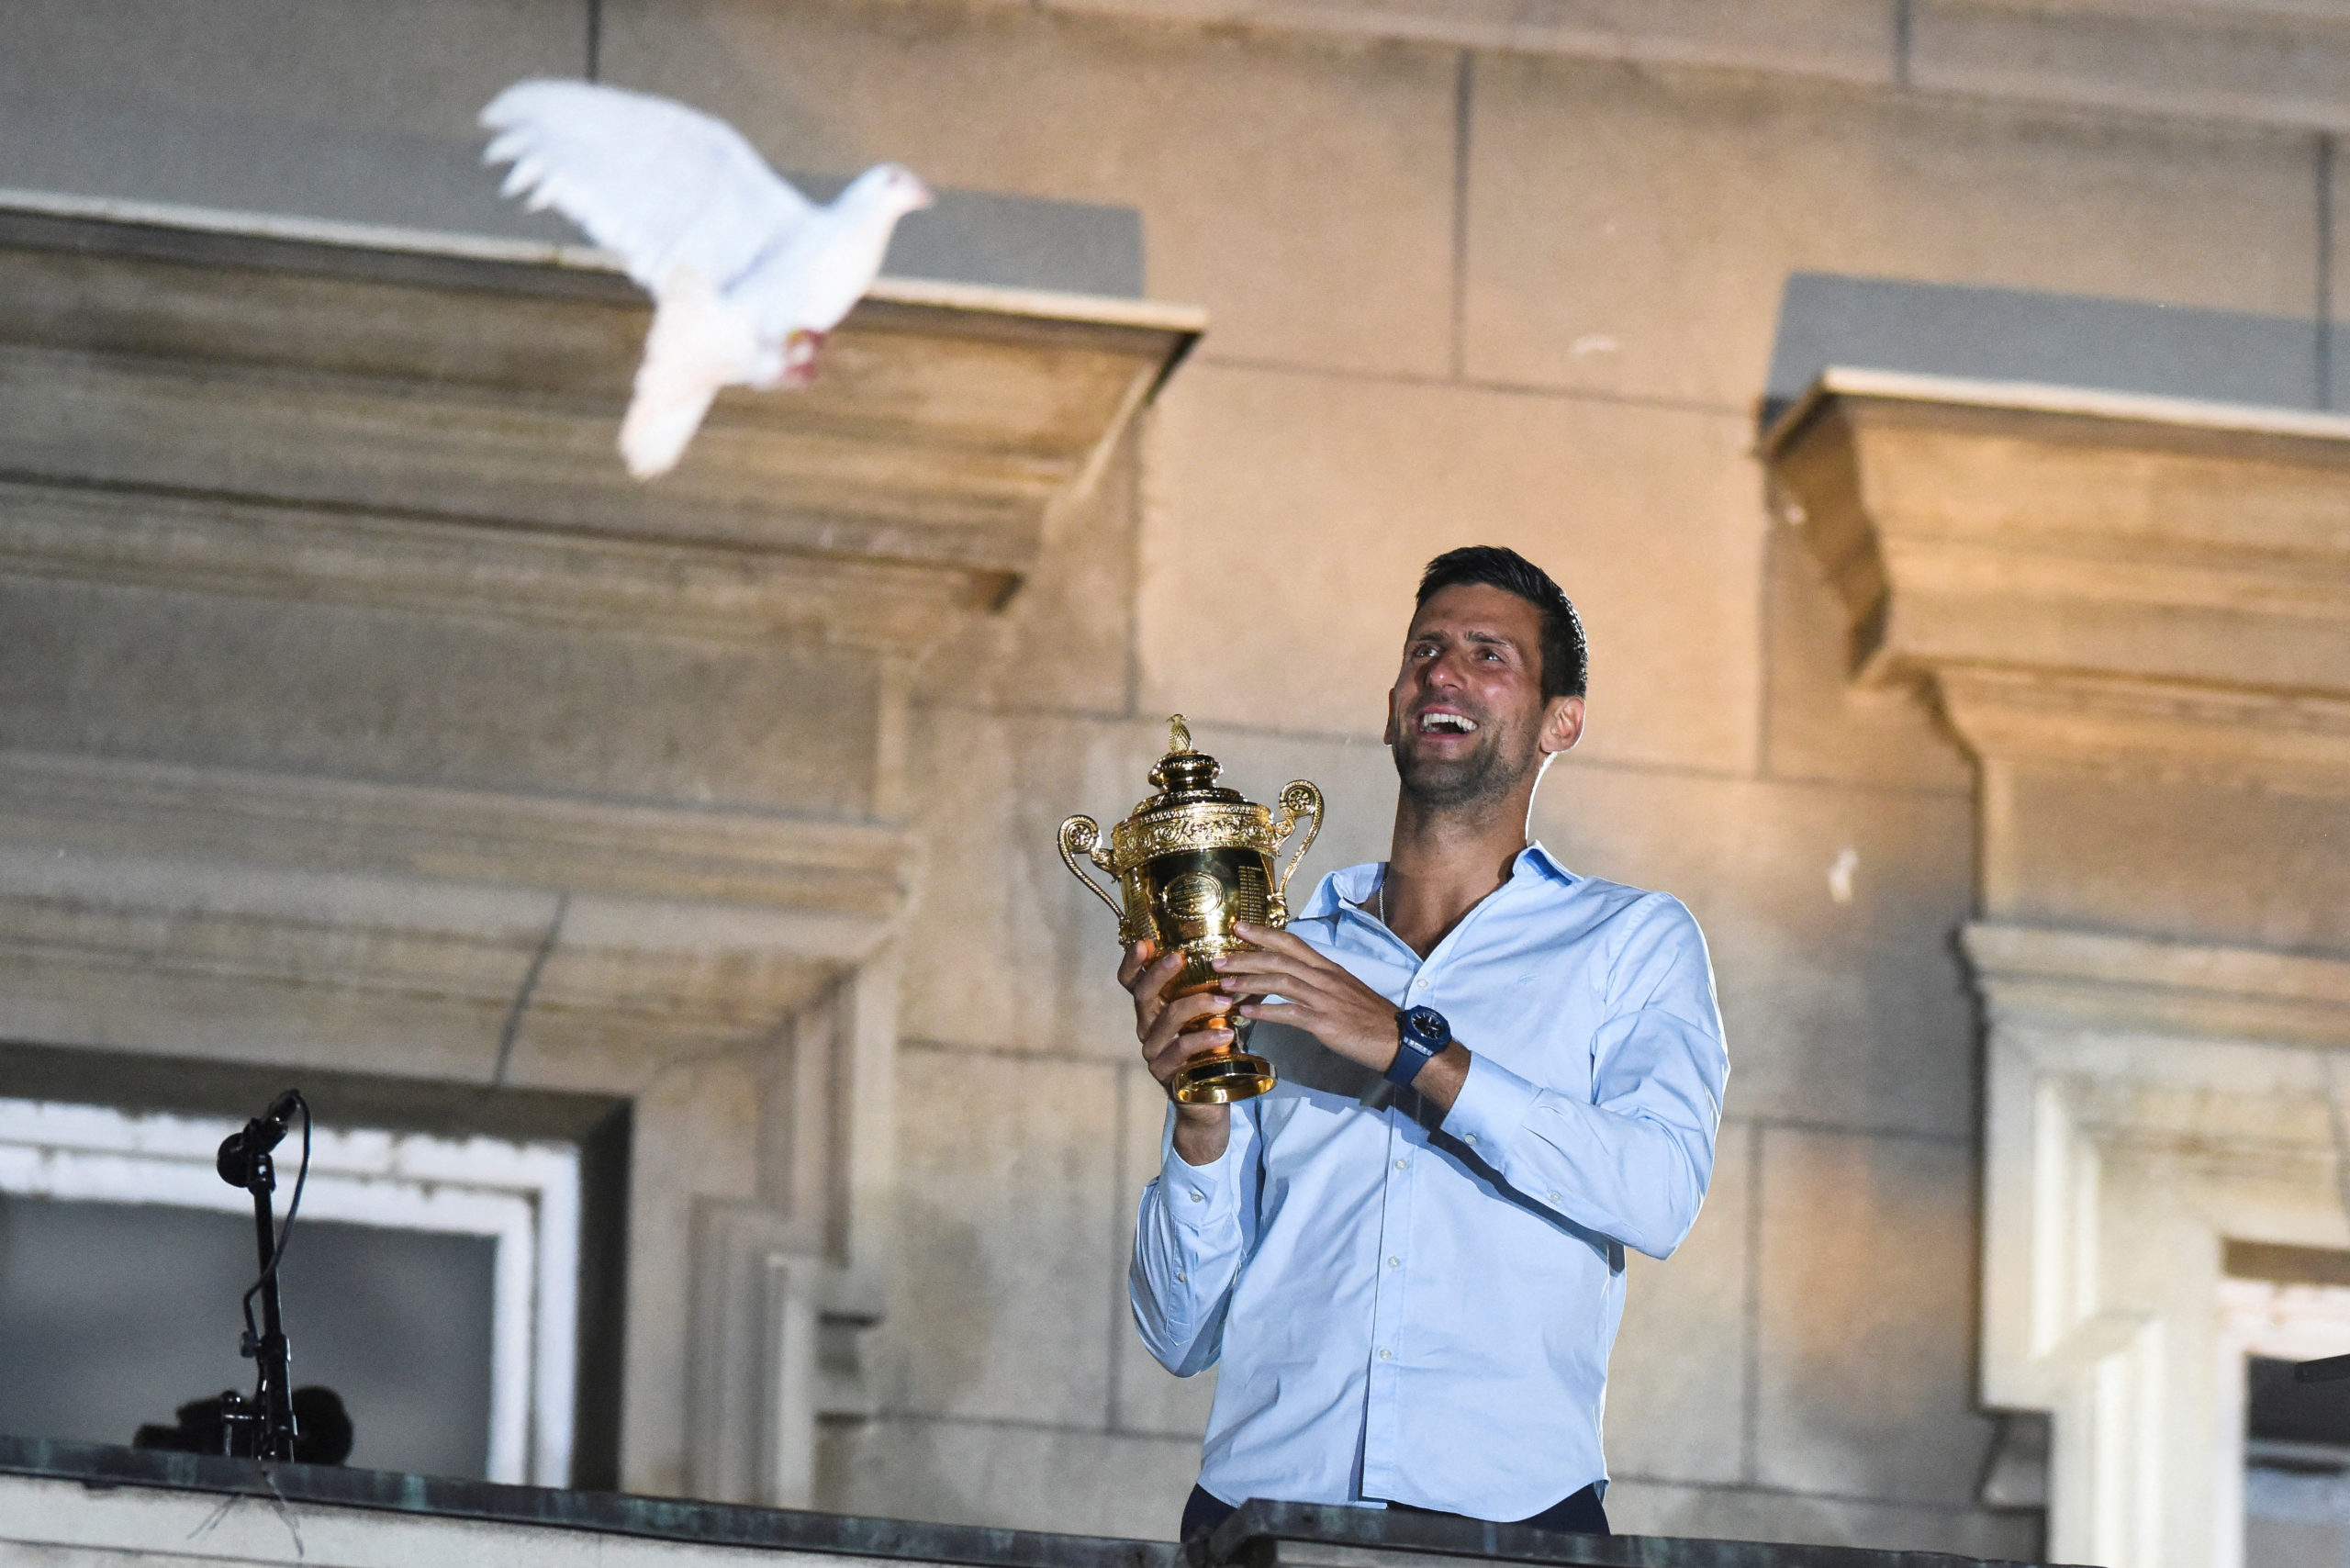 Serbian tennis player Novak Djokovic holds up the winner's trophy and greets fans during a welcoming ceremony in front of the city hall in Belgrade, in Serbia